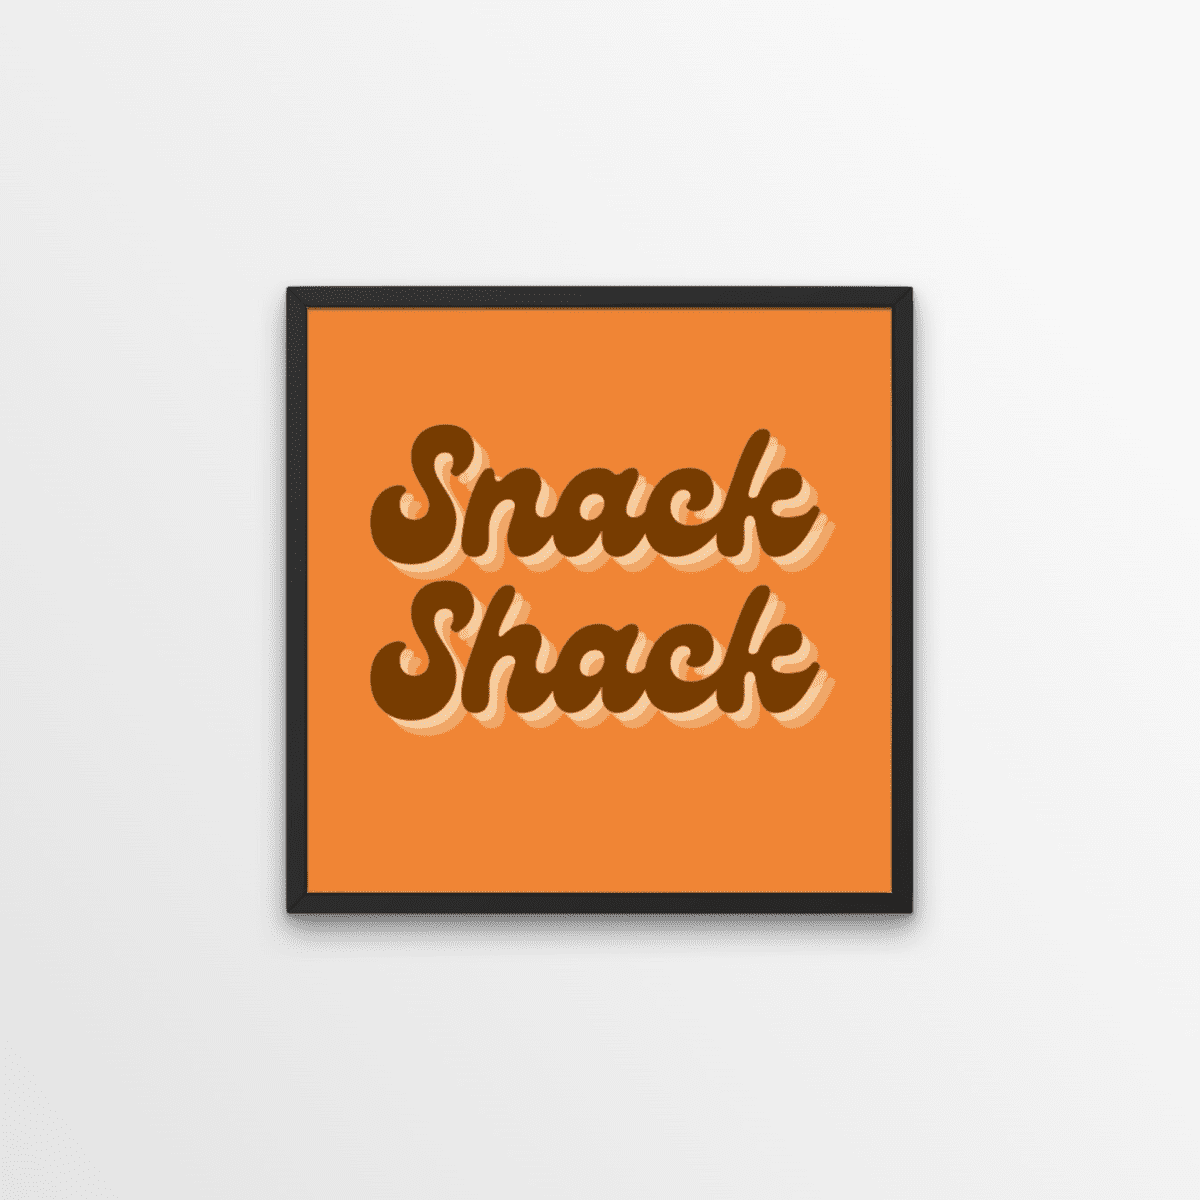 Do you get hangry? You need a snack shack!  We love this fun and retro orange and brown typography pint. It gives us mega school tuck shop vibes.  A bold and quirky statement that's definitely going to be a talking point when your friends pop over.